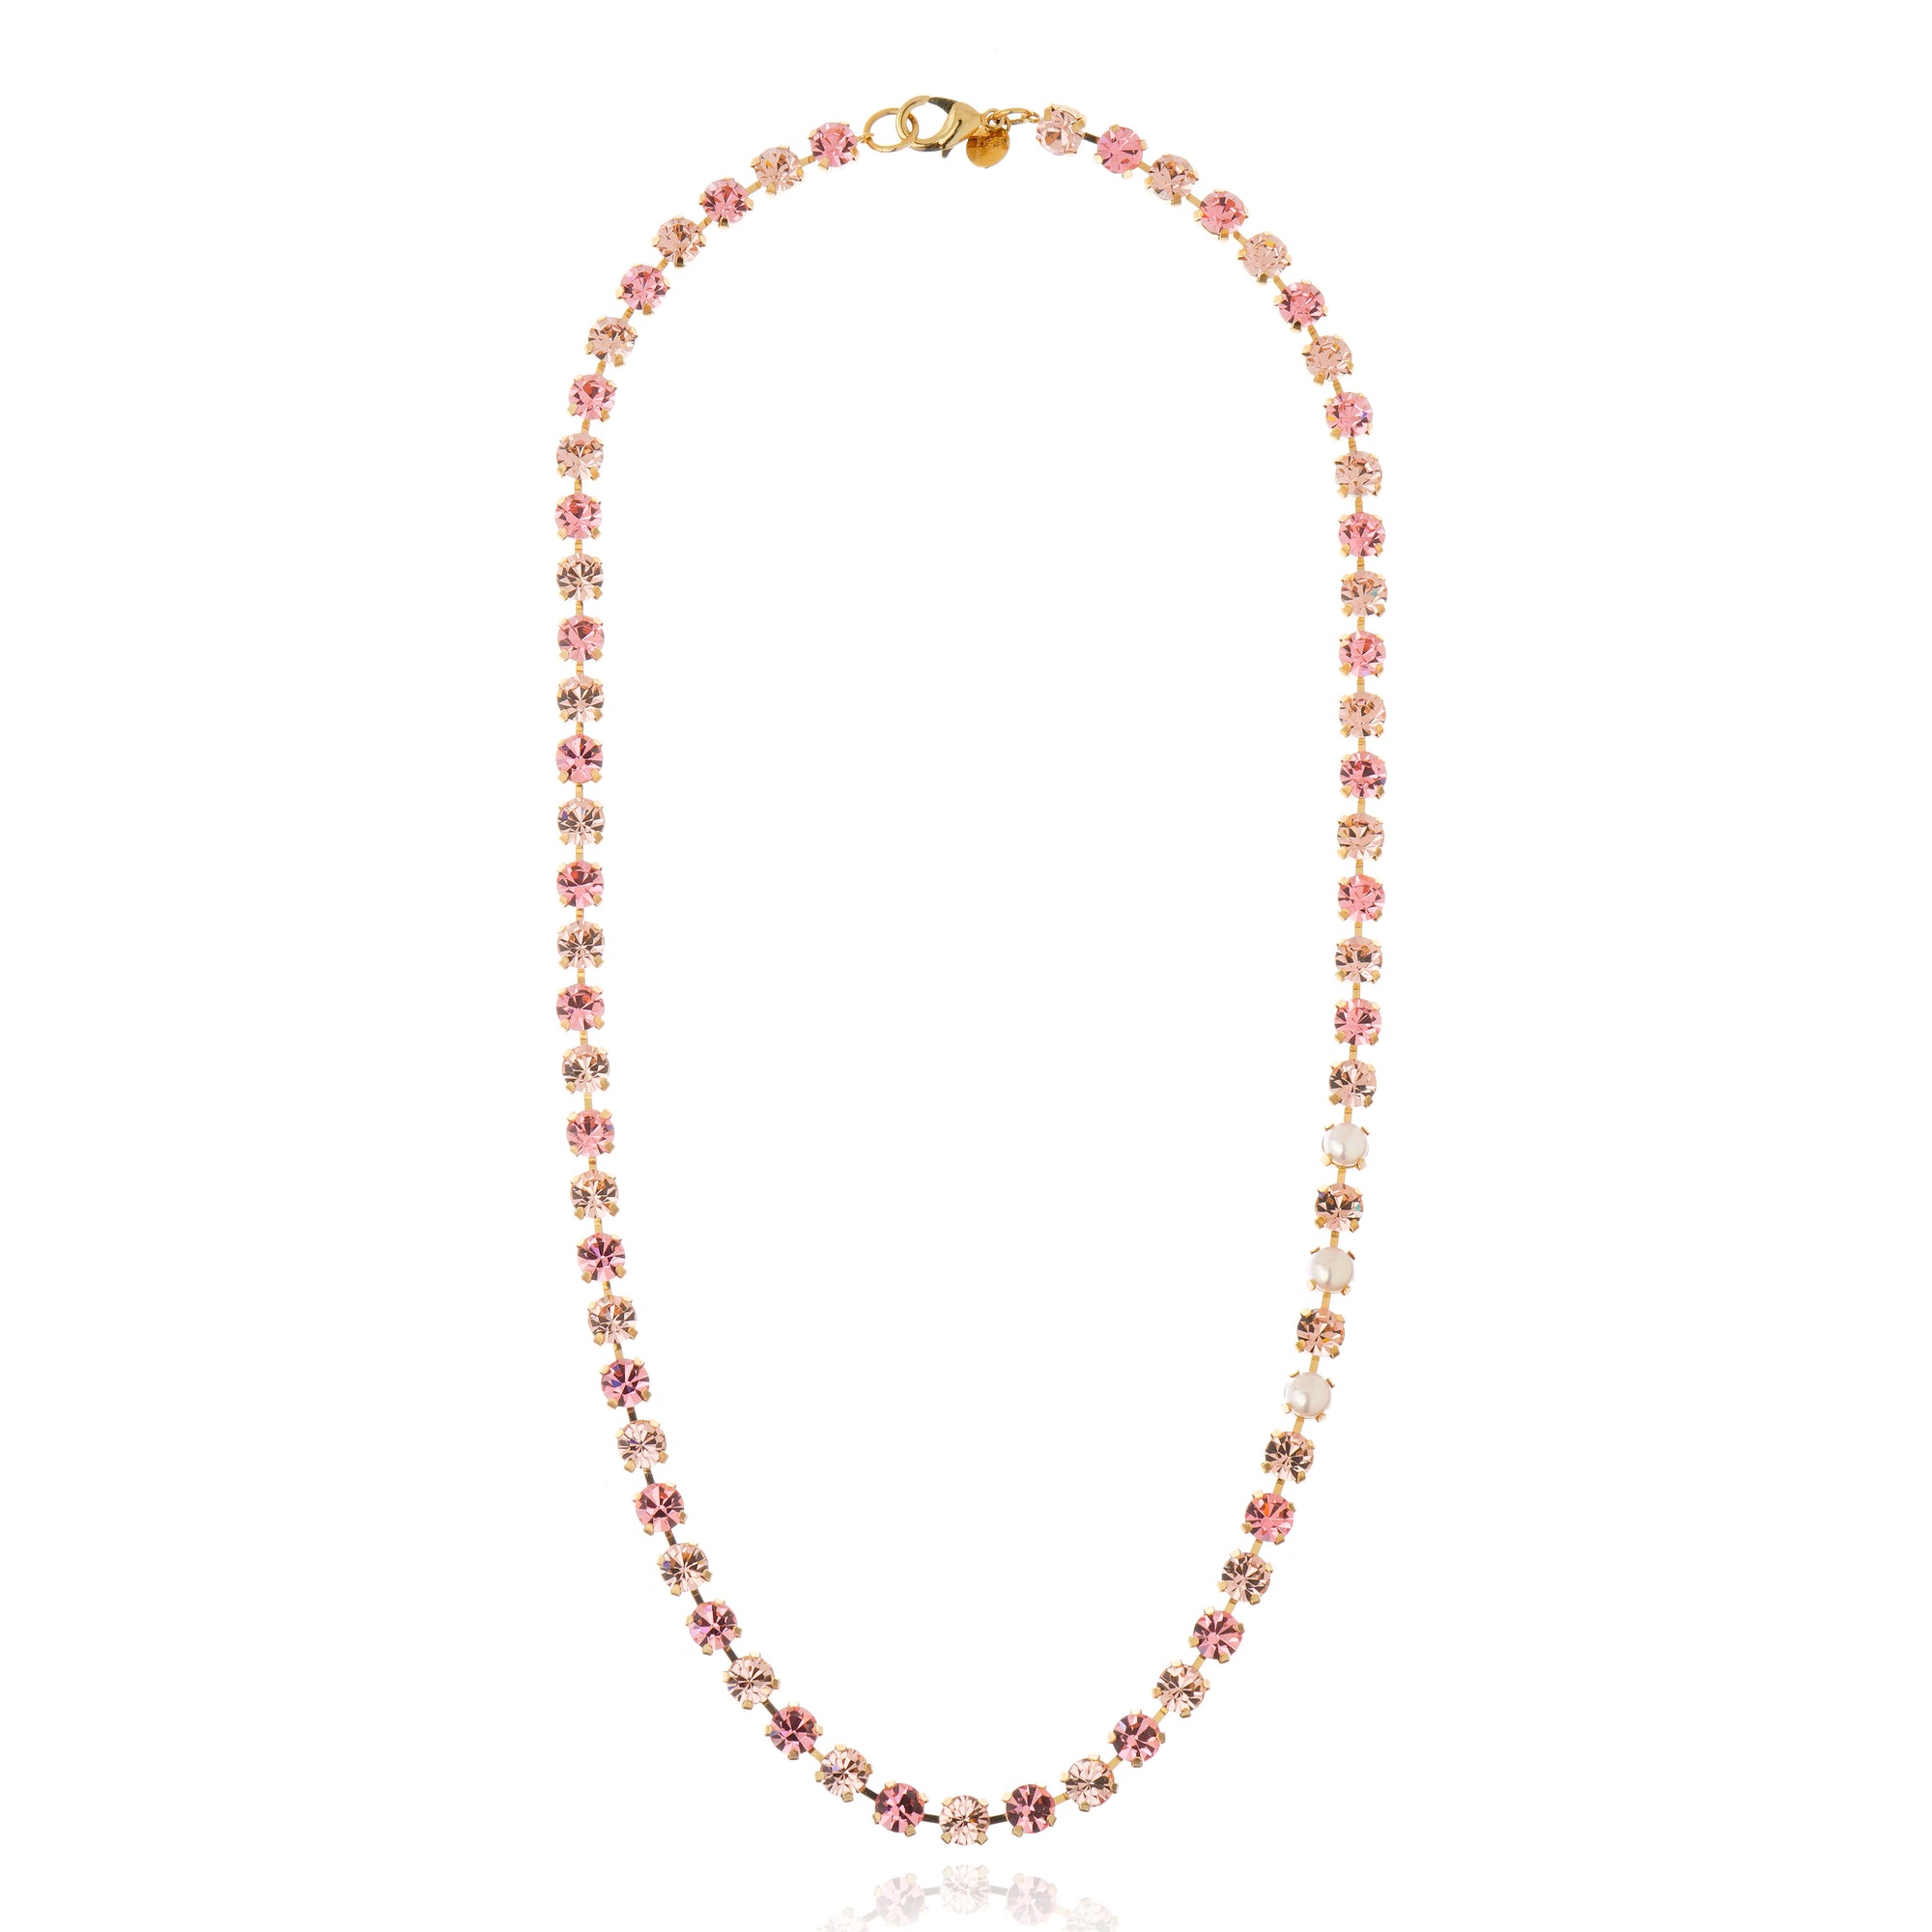 Dazzling Infinity Necklace - Pink Crystal Gold